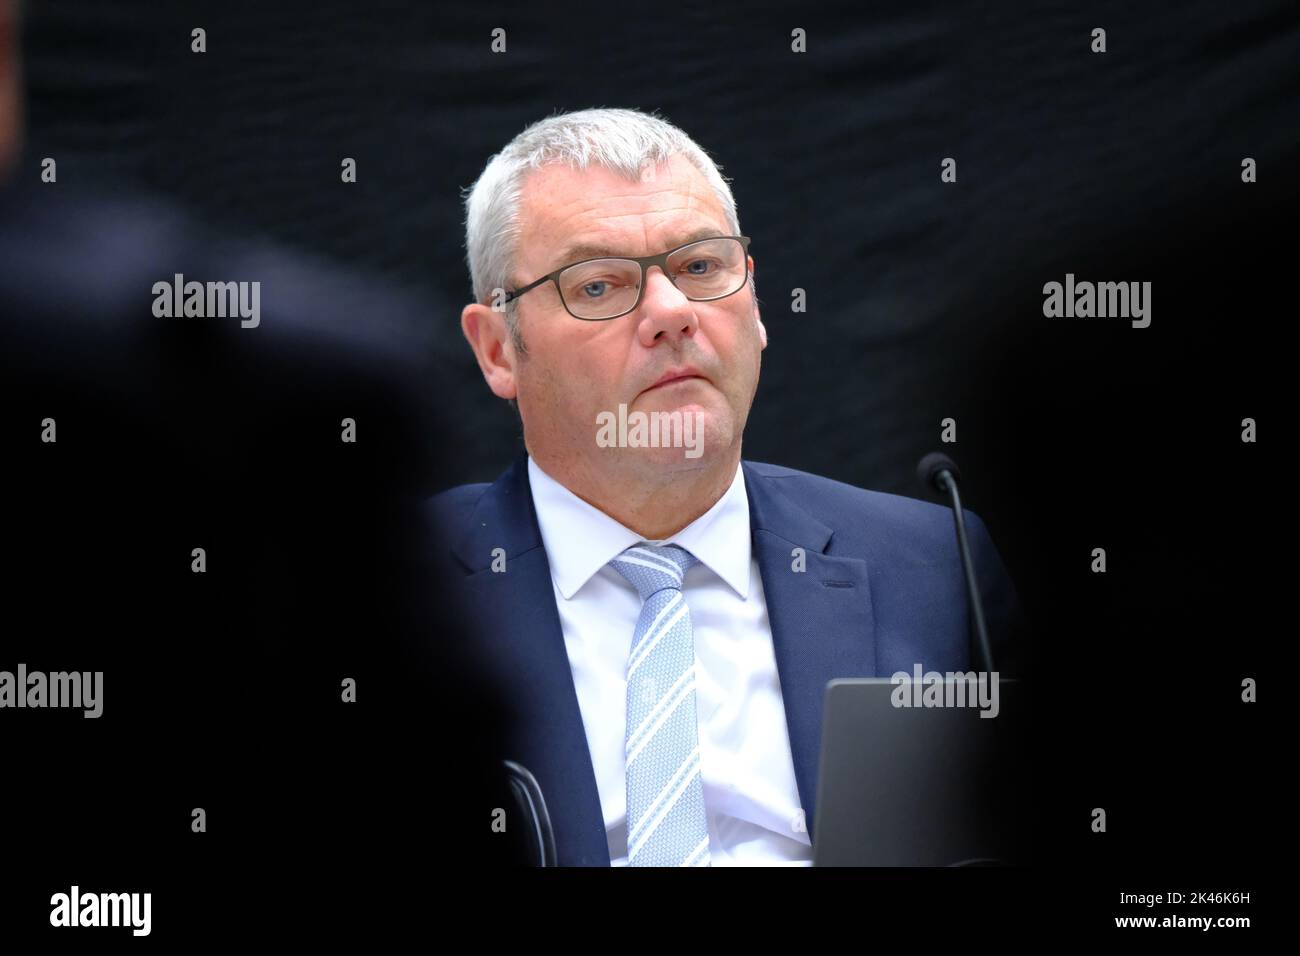 Hereford, Herefordshire, UK – Friday 30th September 2022 – Herefordshire Council called an Extraordinary Meeting today to discuss the recent Ofsted inspection report which found the councils Children’s Services department to be Inadequate in four judgements. Photo shows Herefordshire Council Chief Executive Paul Walker listening to the extraordinary meeting. Photo Steven May / Alamy Live News Stock Photo